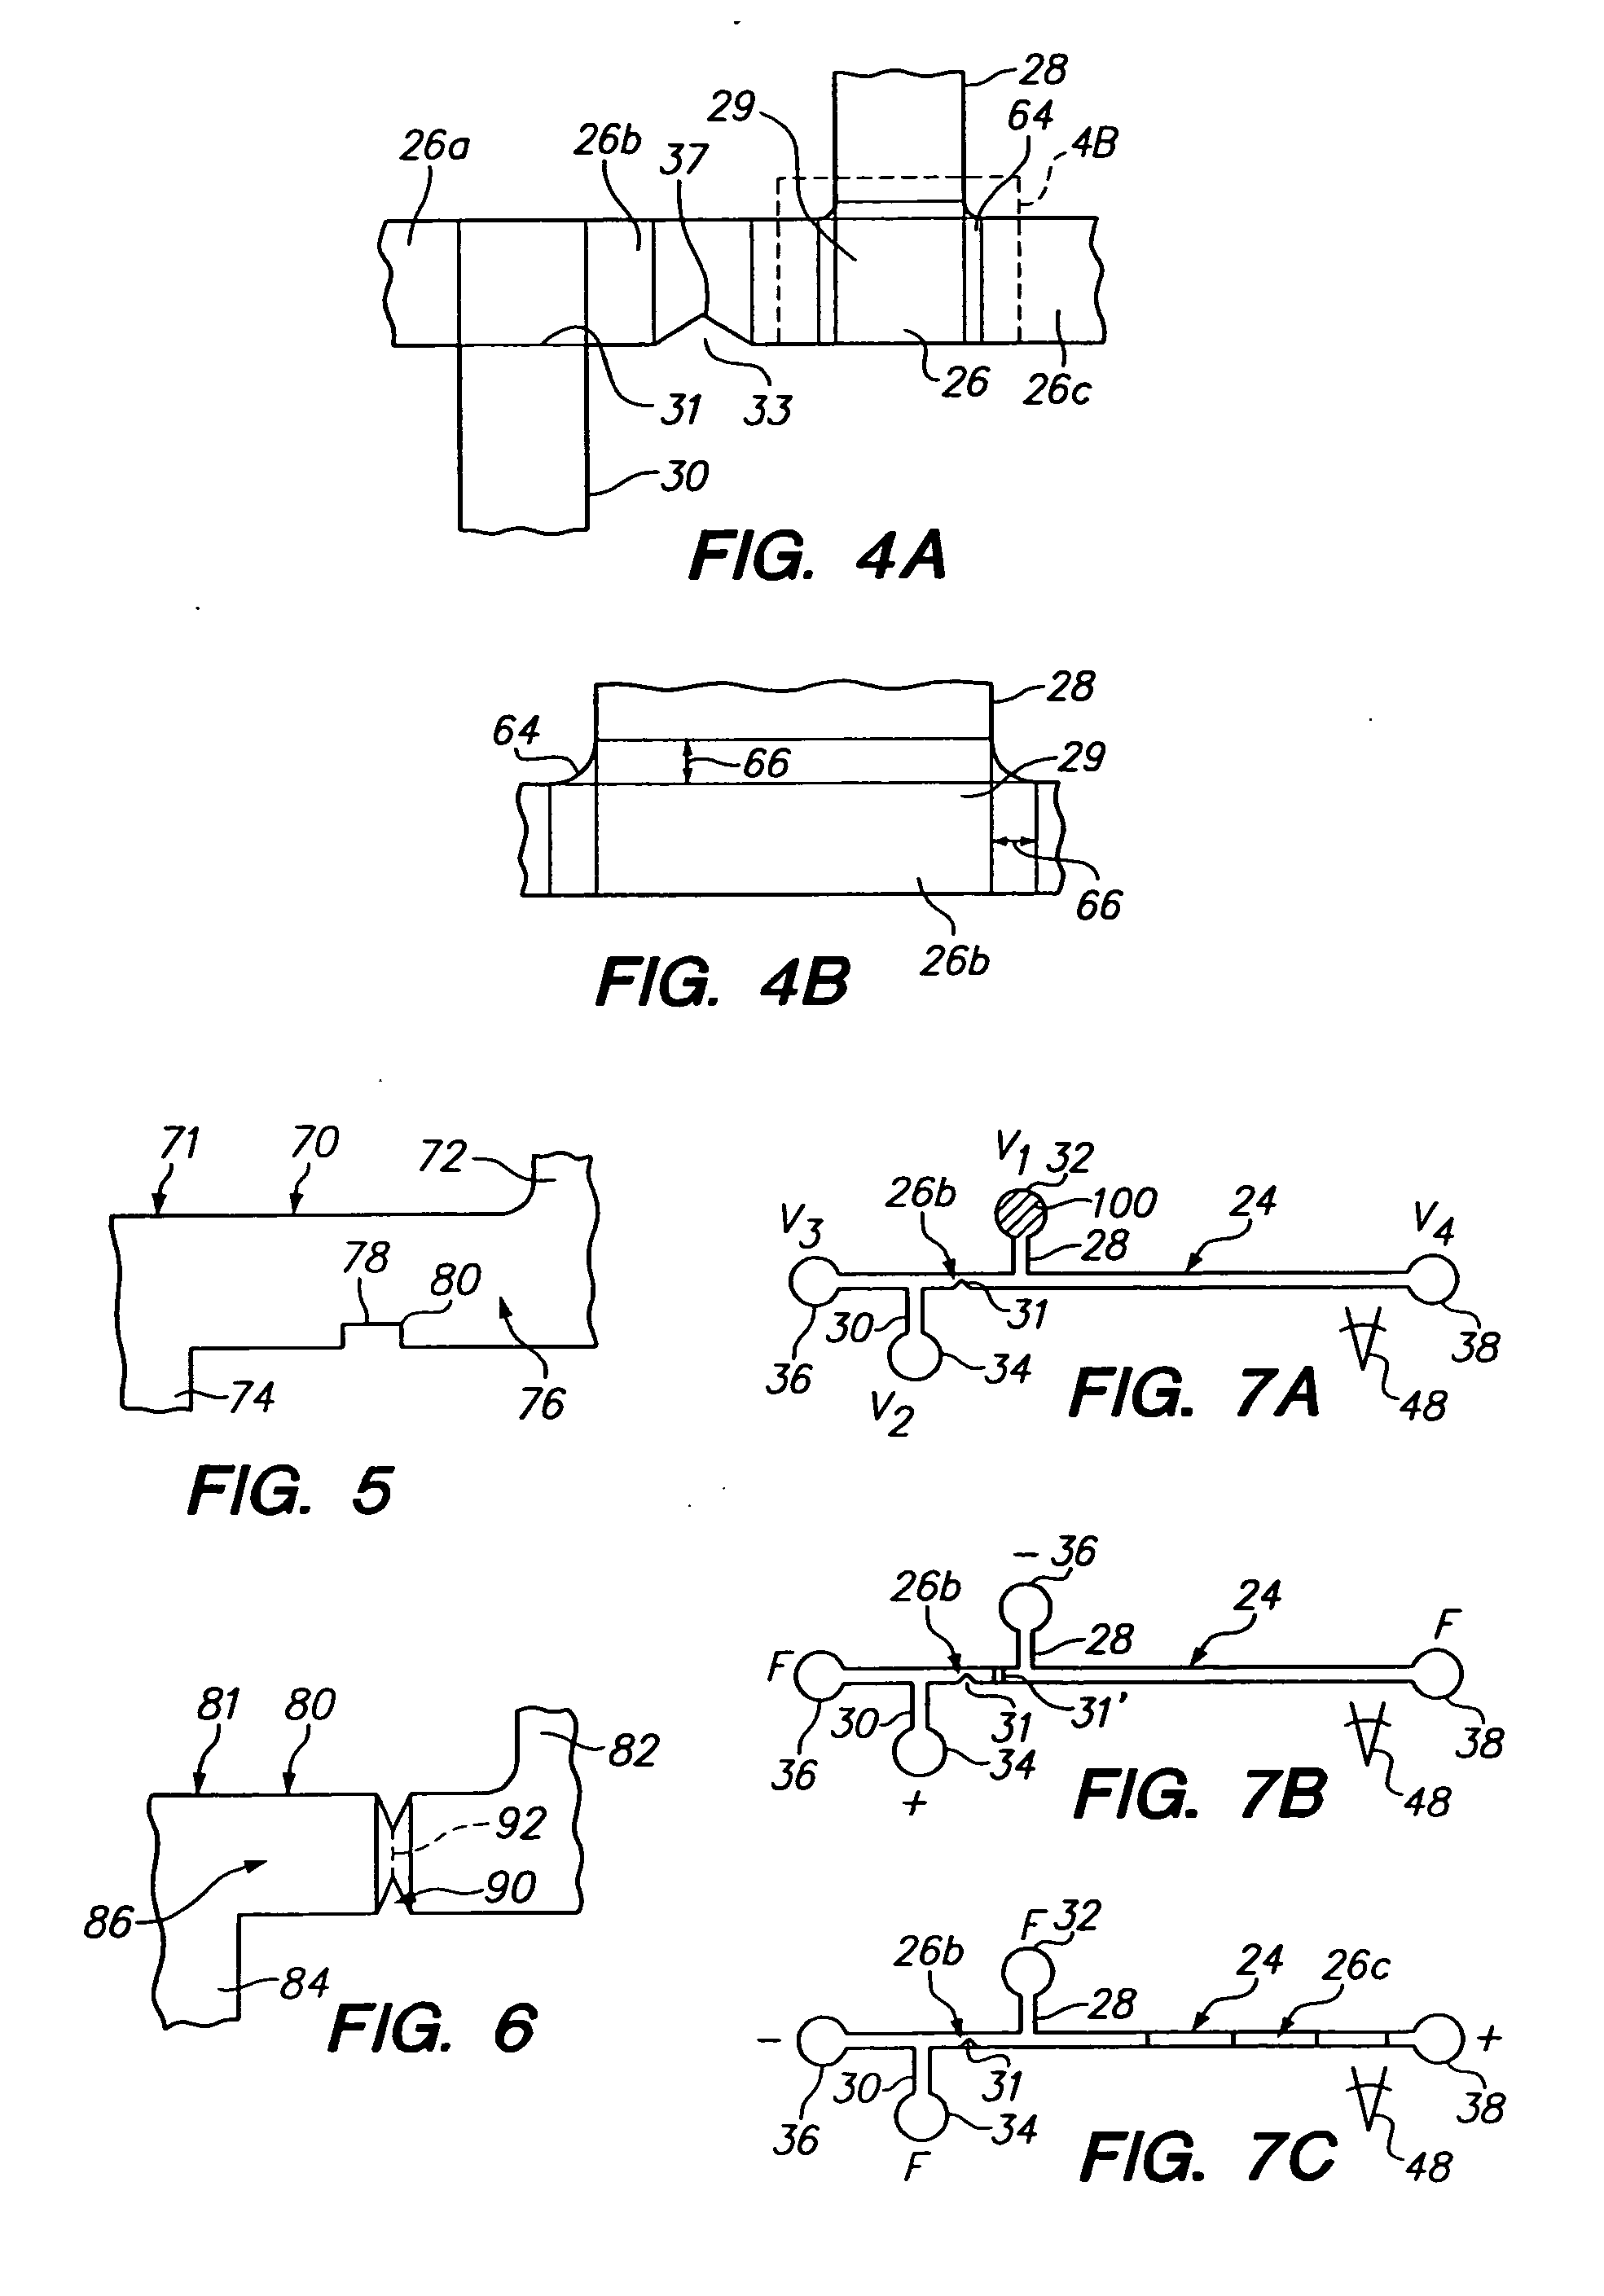 Microfluidic device and method for improved sample handling